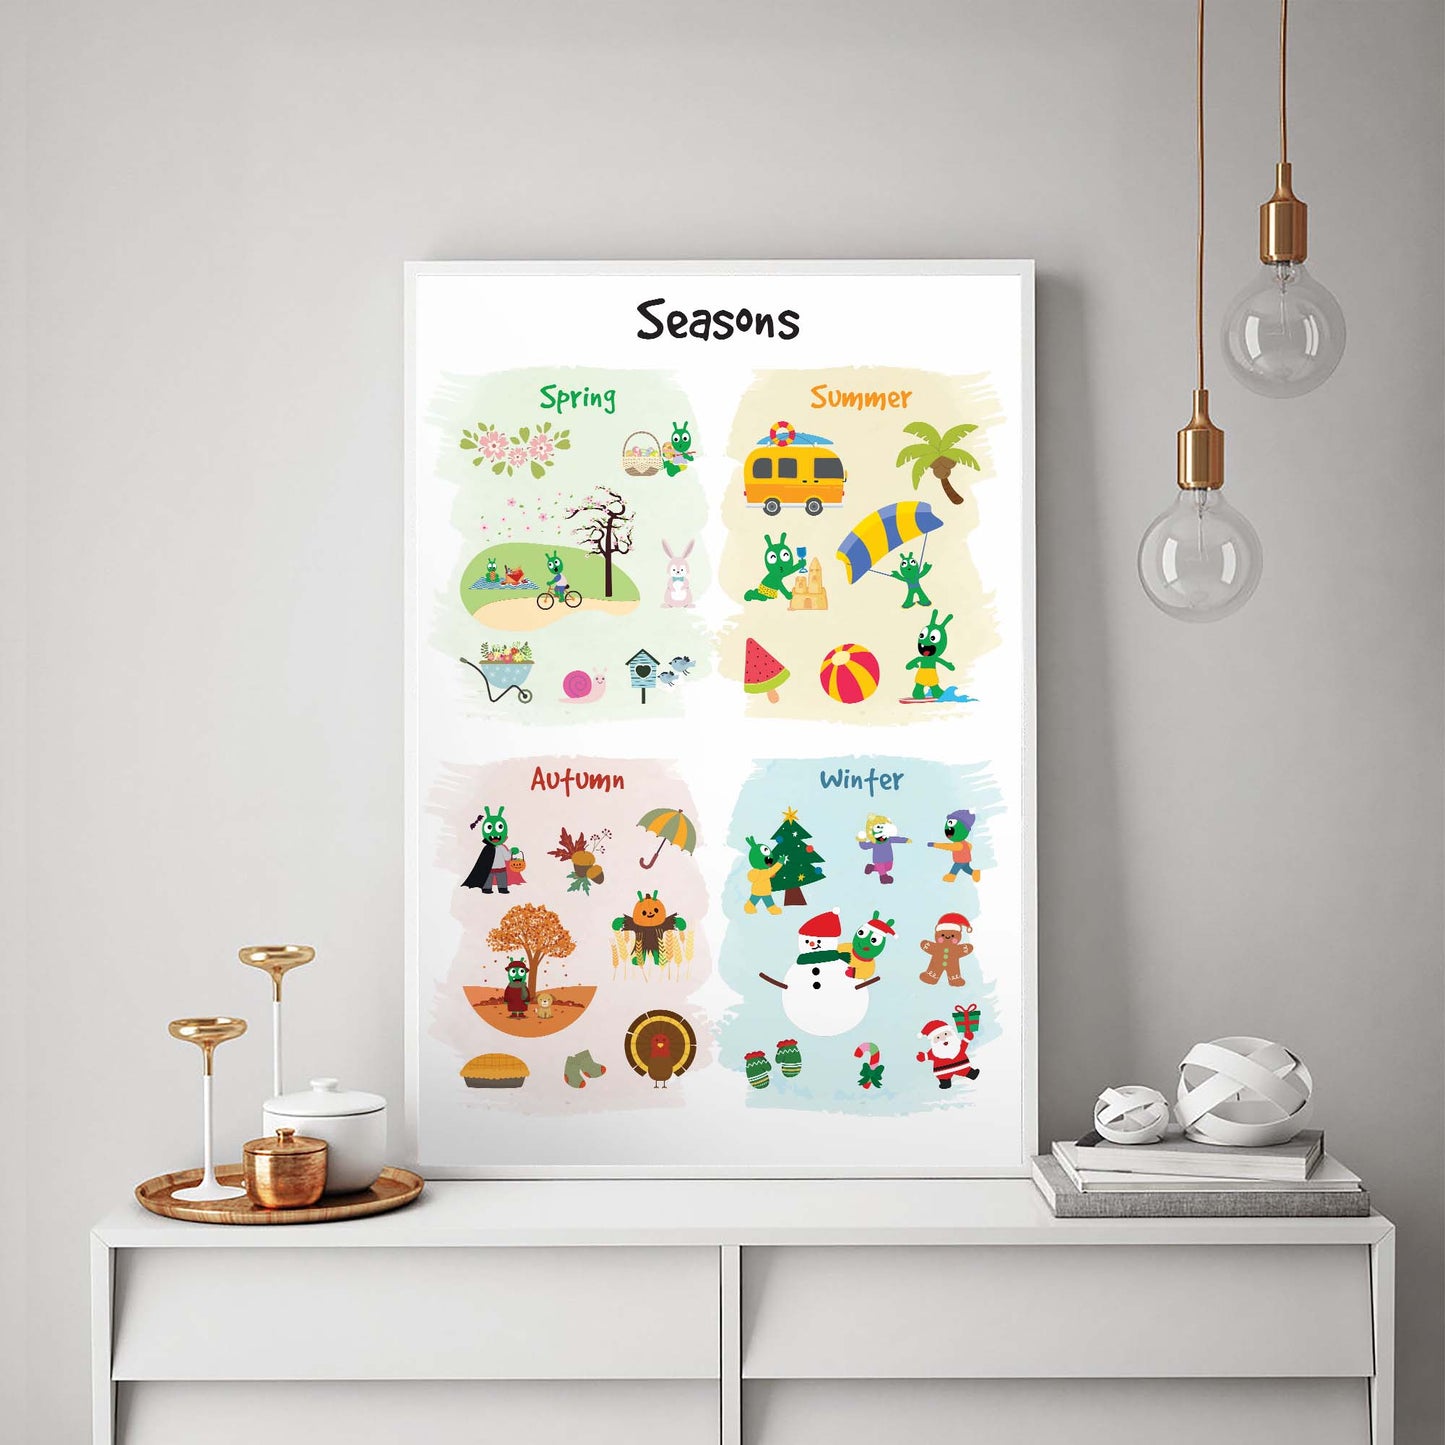 Seasons Of The Year With Pea Pea Poster For Kids – peapeastore.com